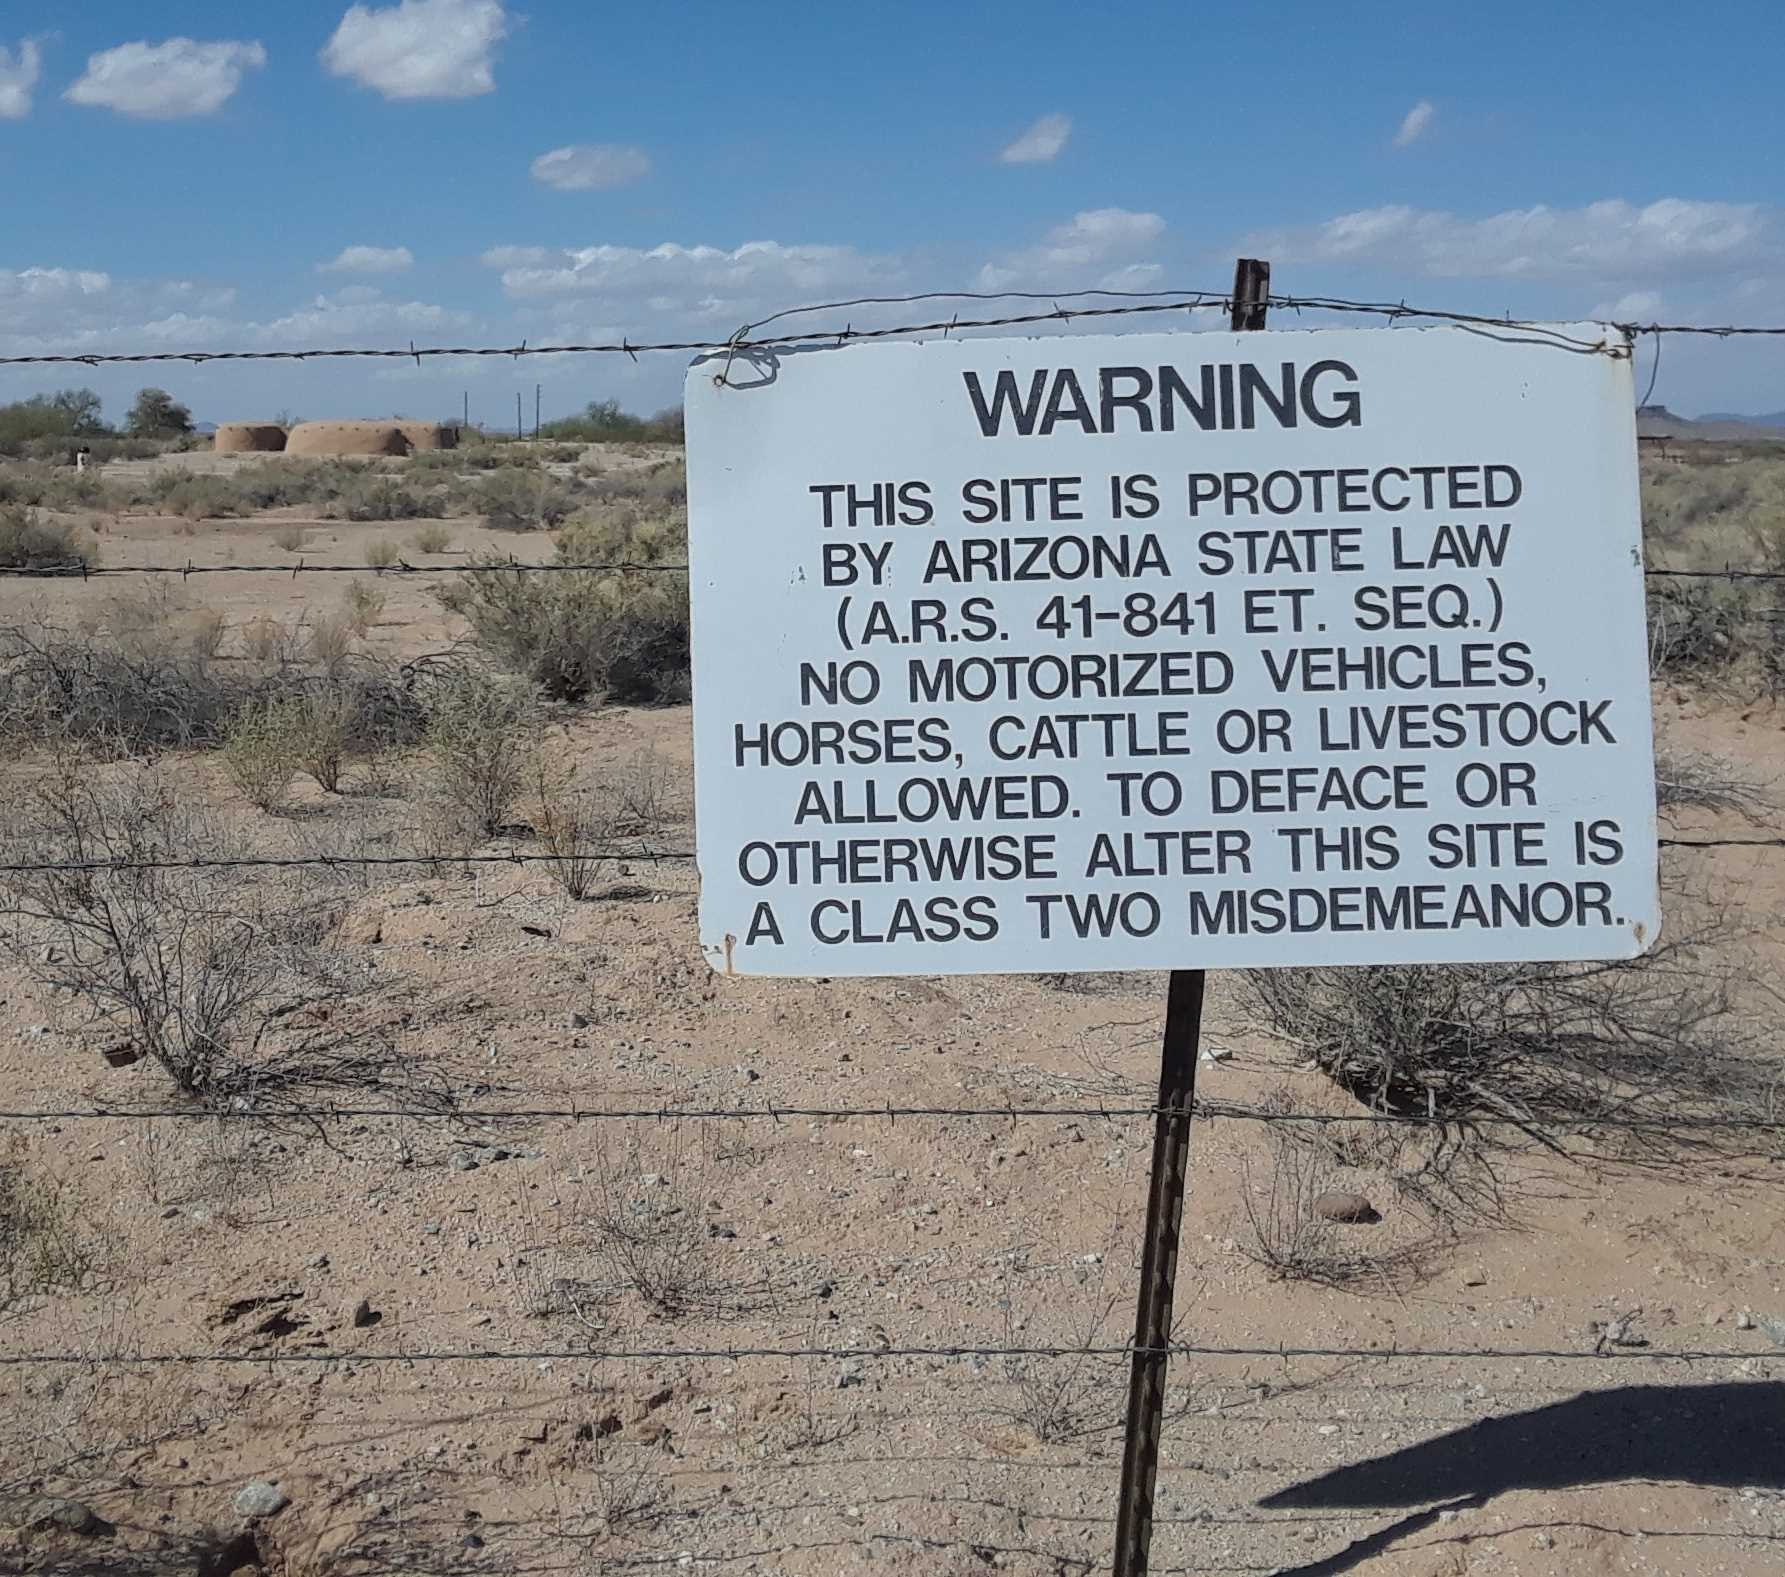 Sign and fence at the Gatlin site, Gila Bend AZ. Image: J.R. Welch